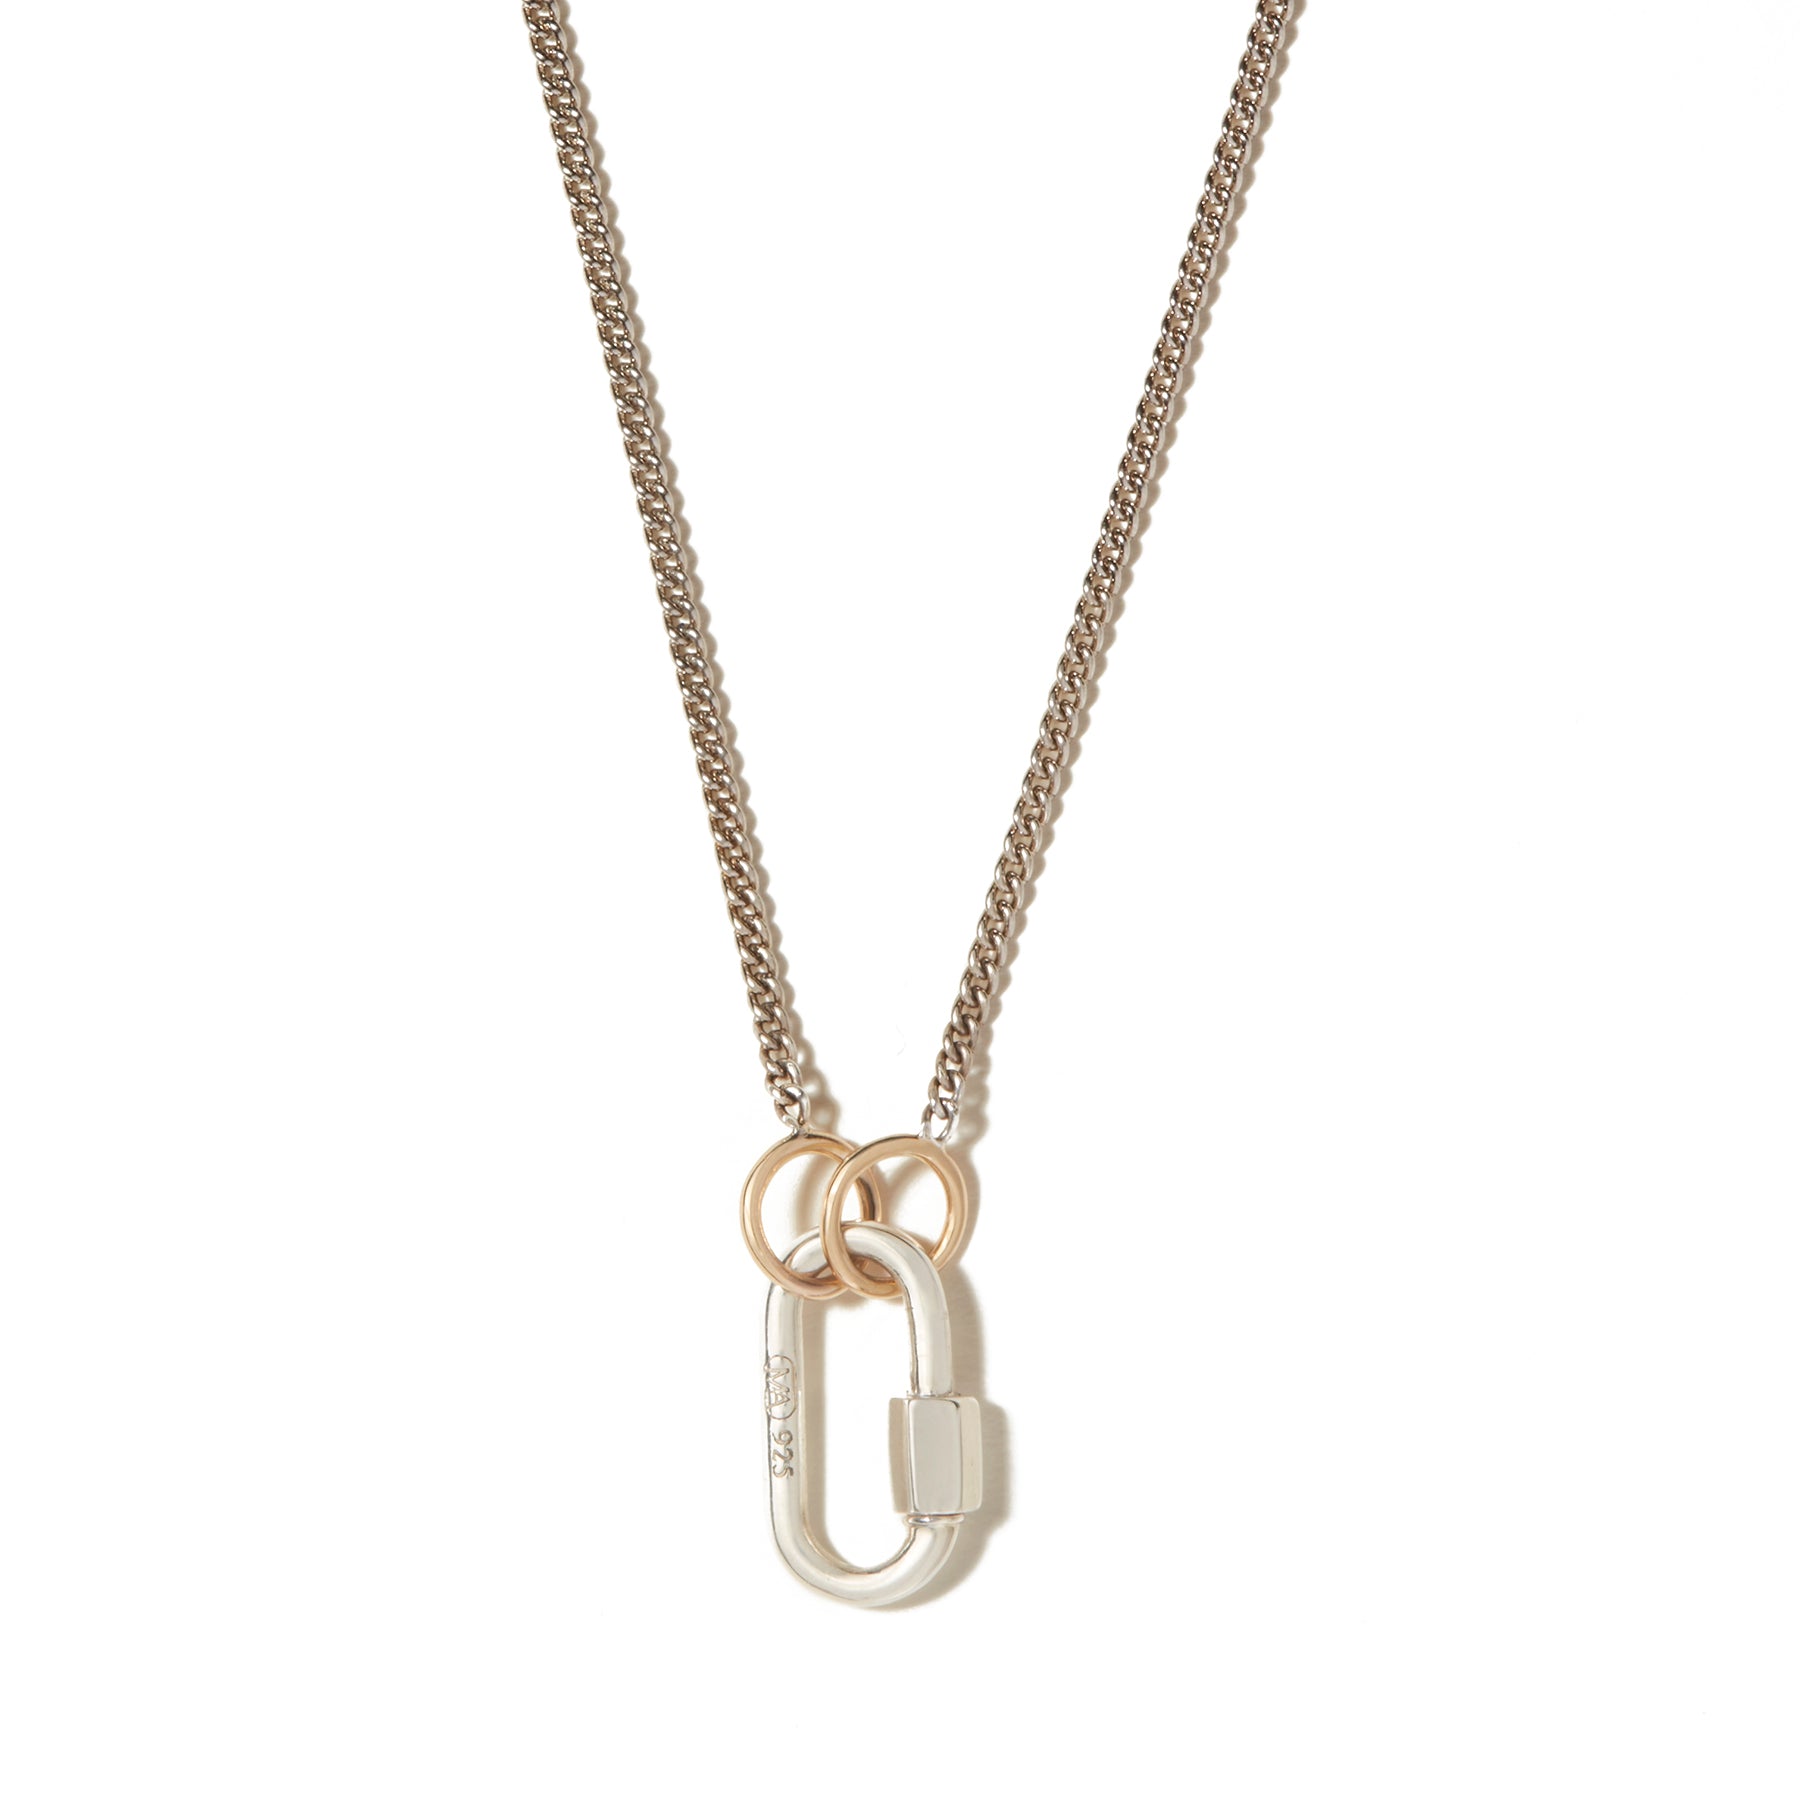 Marla Aaron Silver and Gold Chain Necklace with Lock